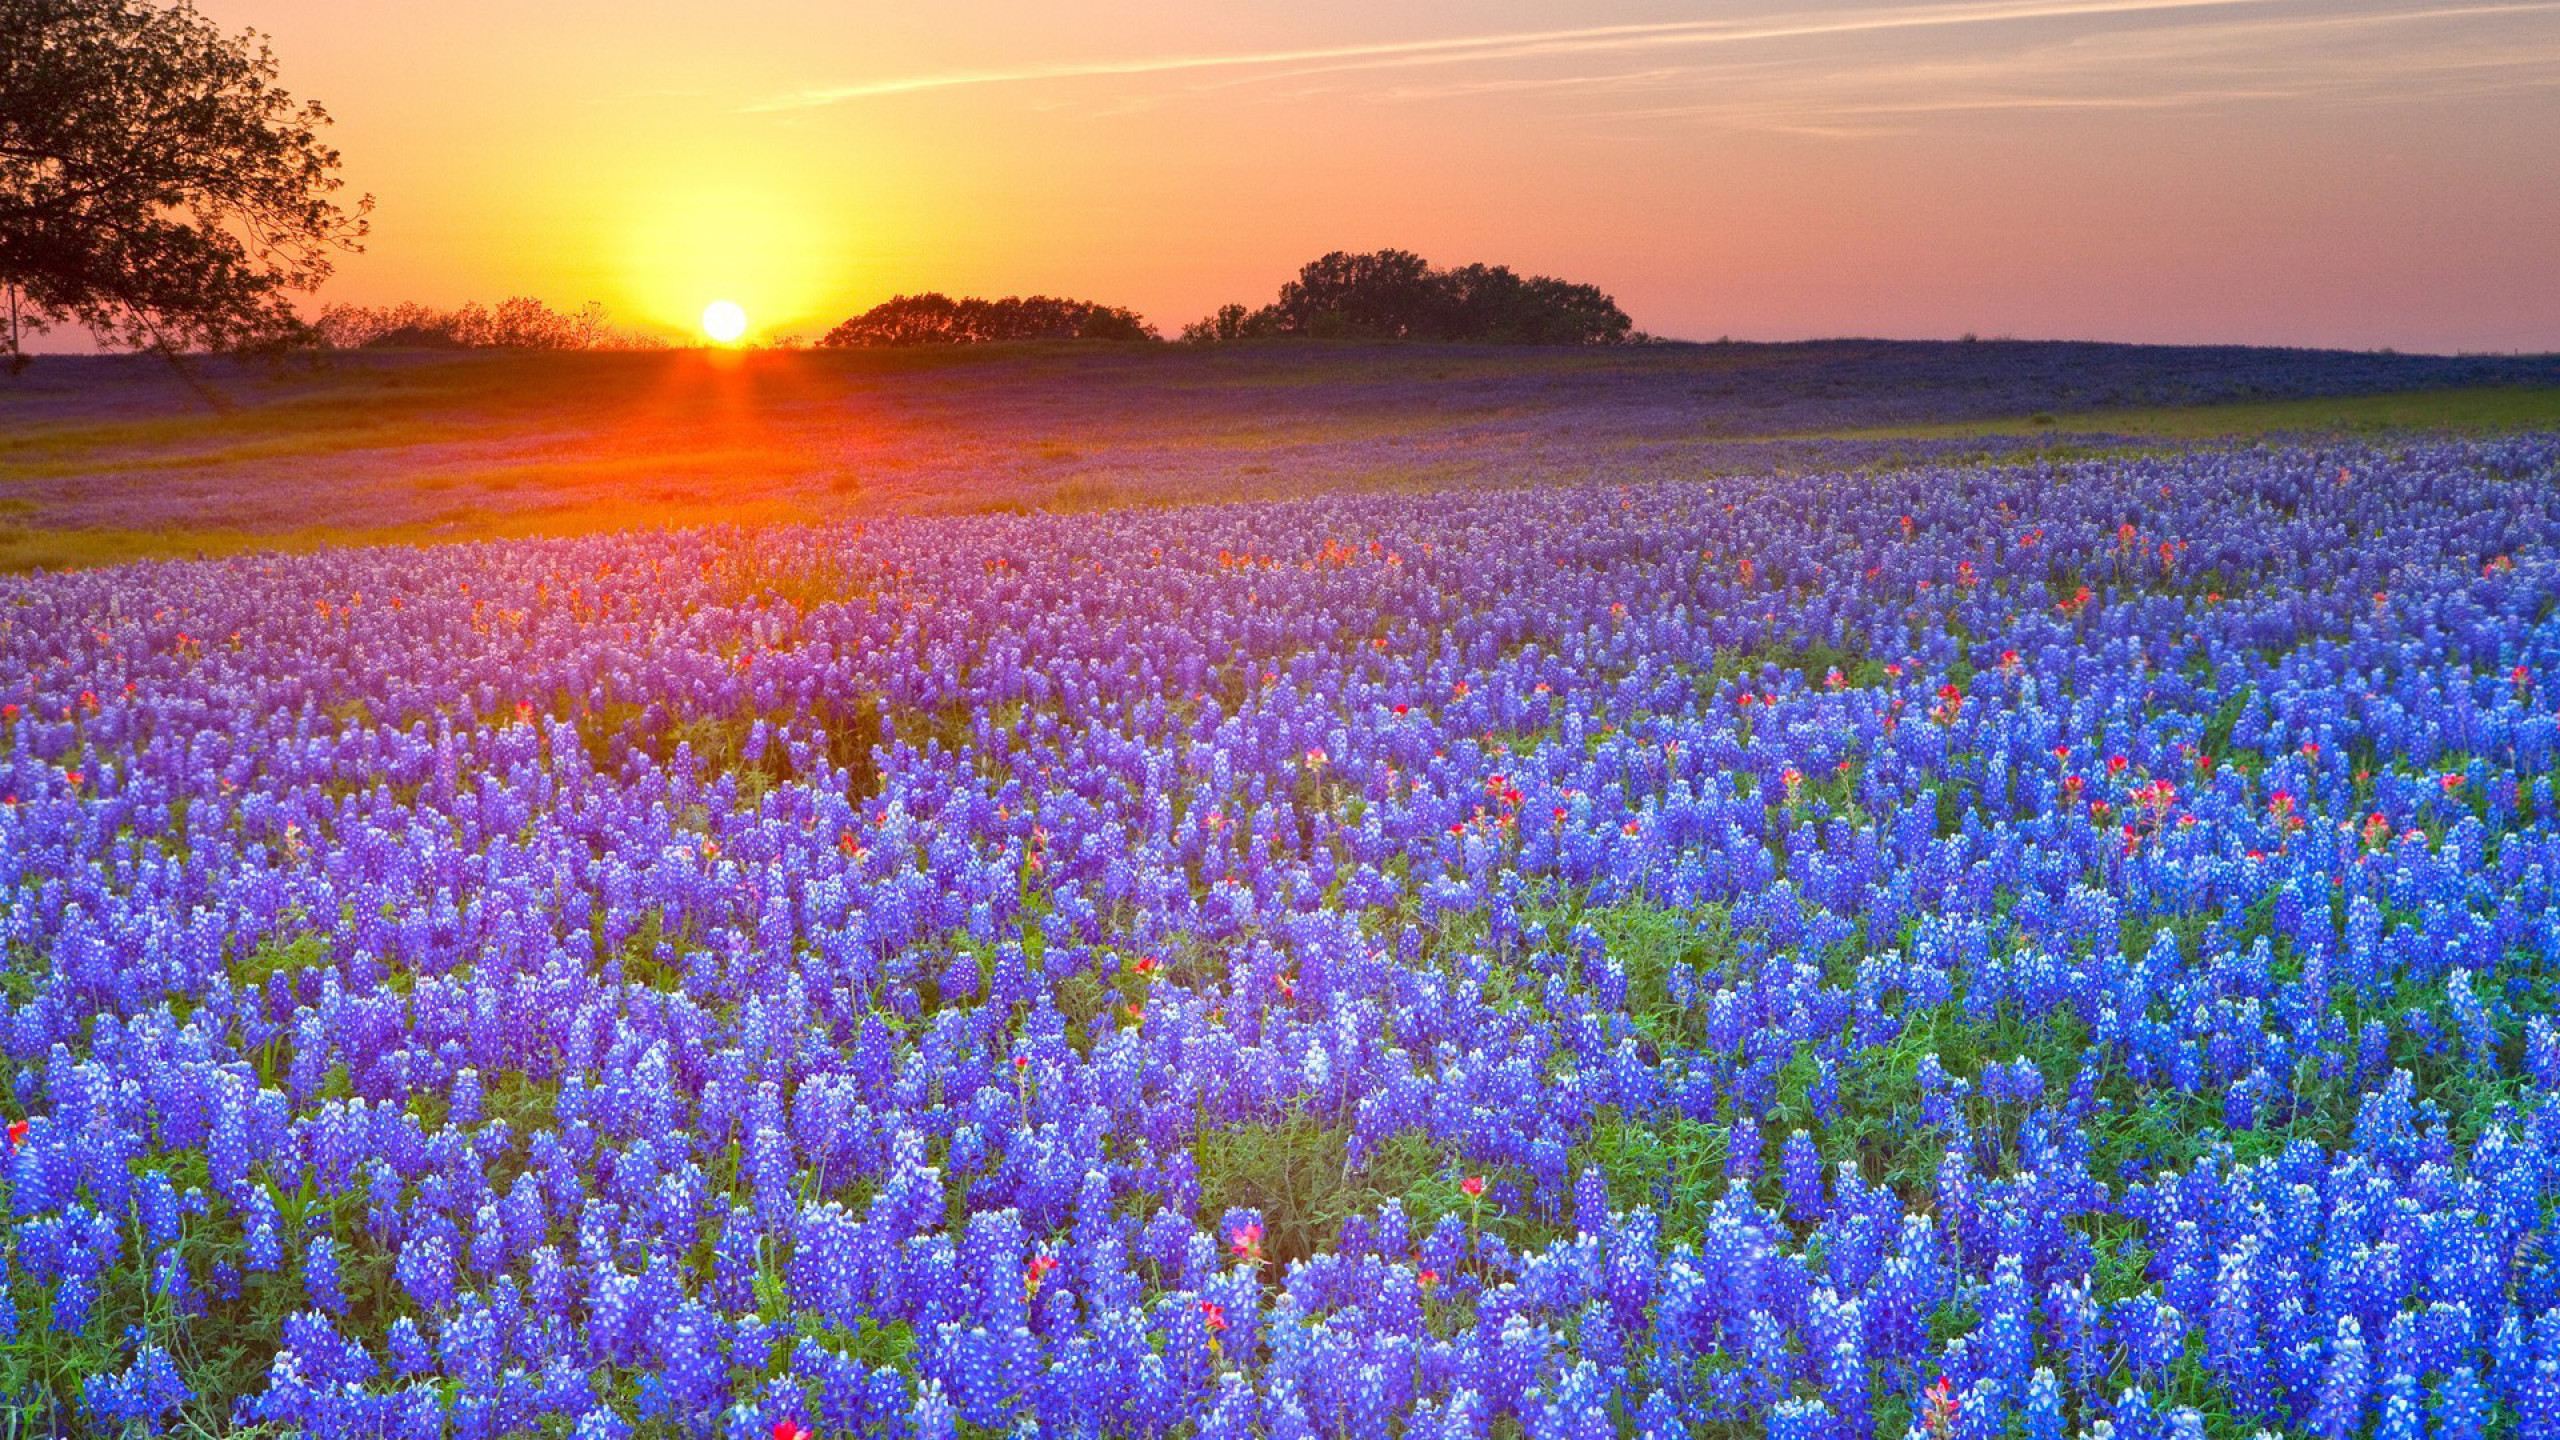 2560x1440 Texas Images | QG.87 PC&Mobile Backgrounds Texas